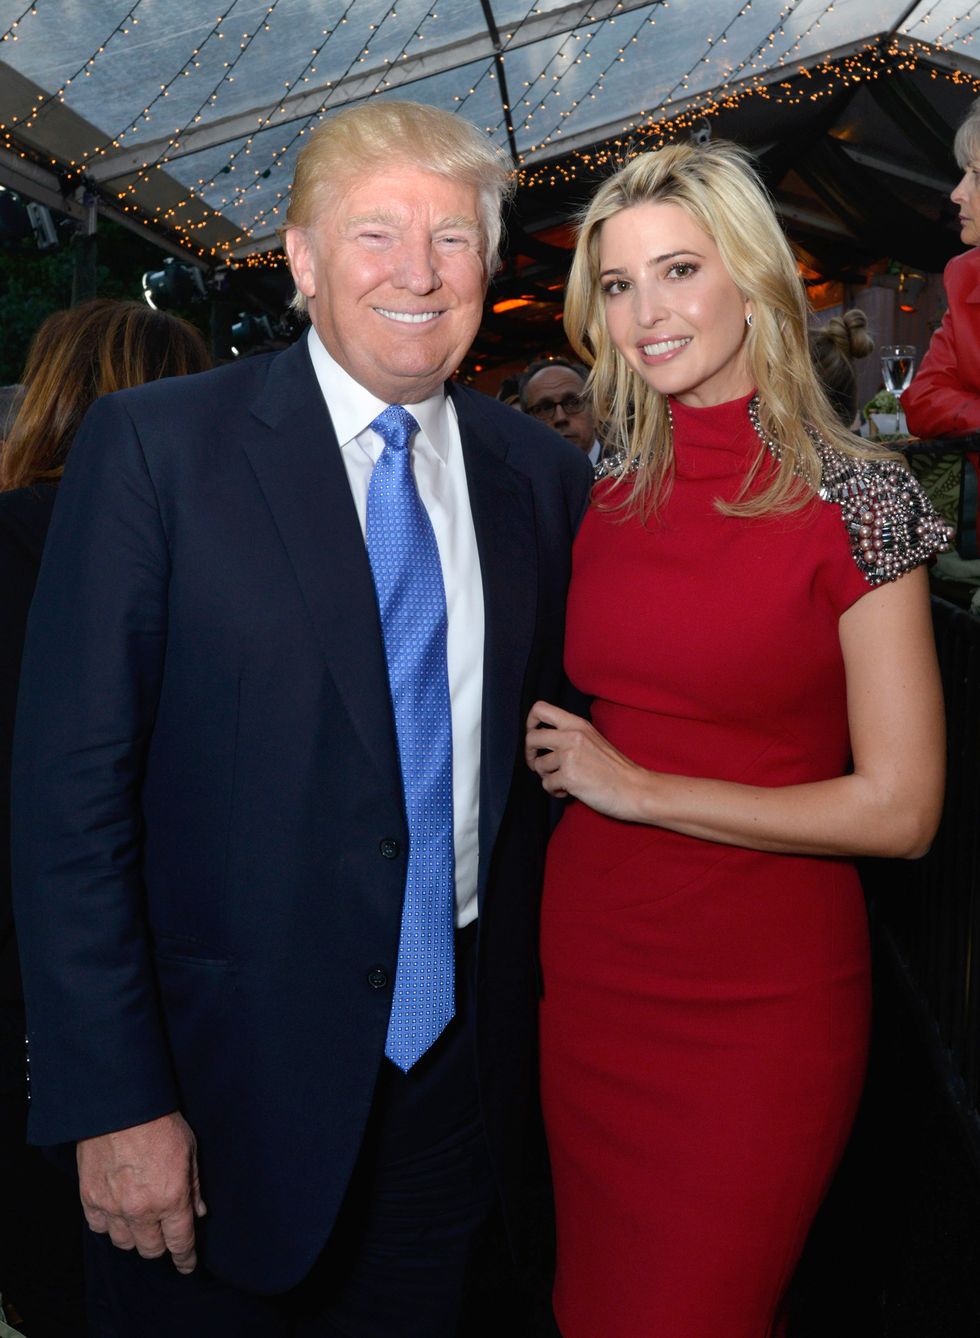 Donald and Ivanka Trump at Central Park Horse Show Presented By Rolex | ELLE UK